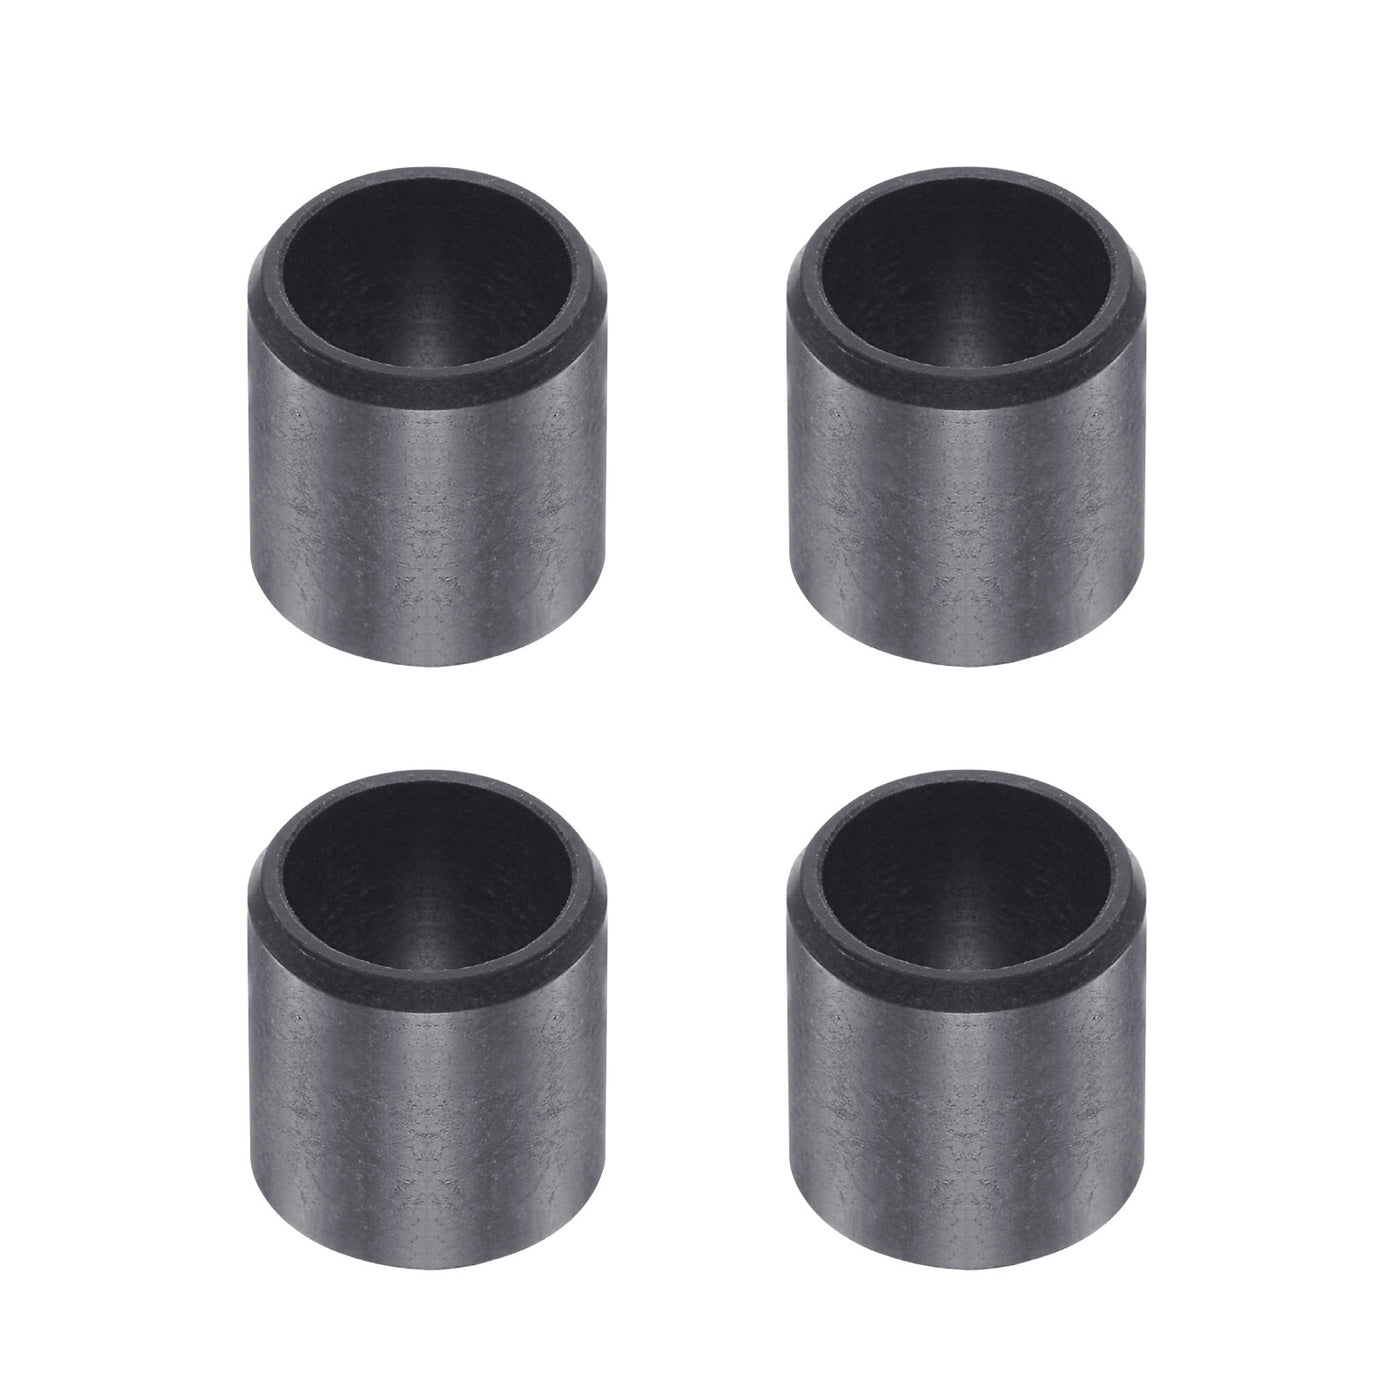 uxcell Uxcell Sleeve Bearings 8mmx10mmx10mm POM Wrapped Oilless Bushings Black 4pcs